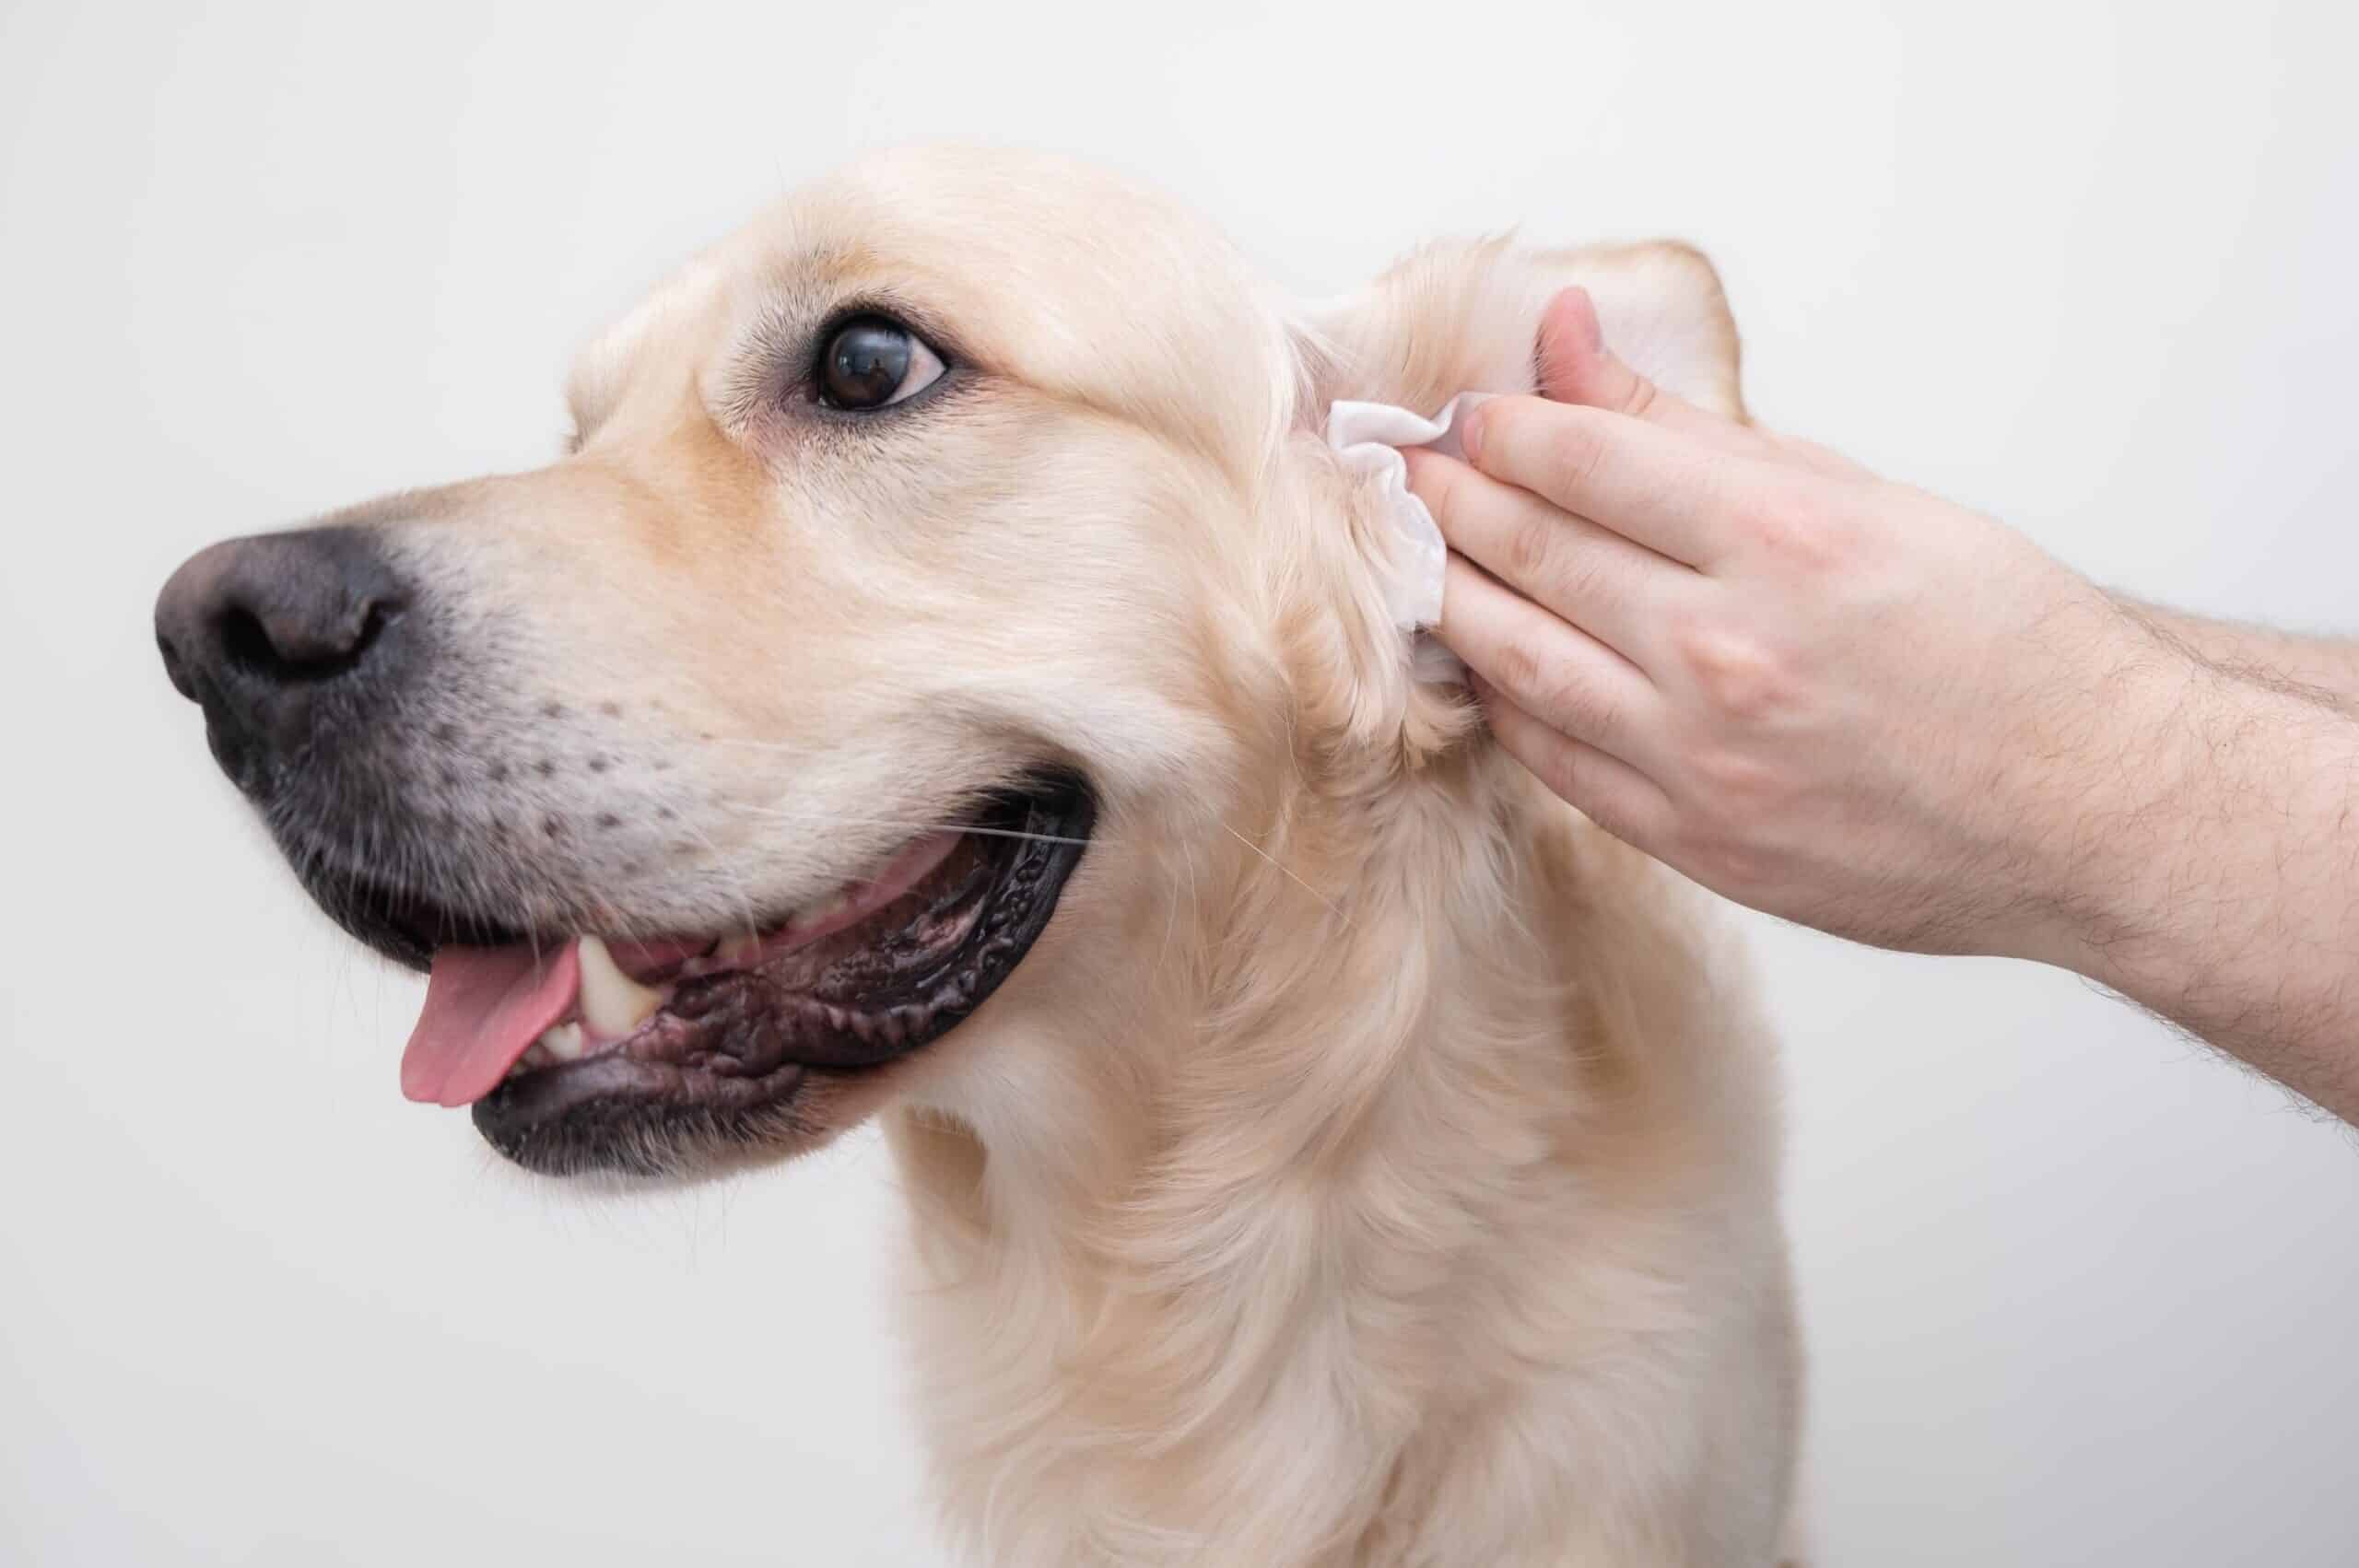 How to soothe dogs ears after grooming